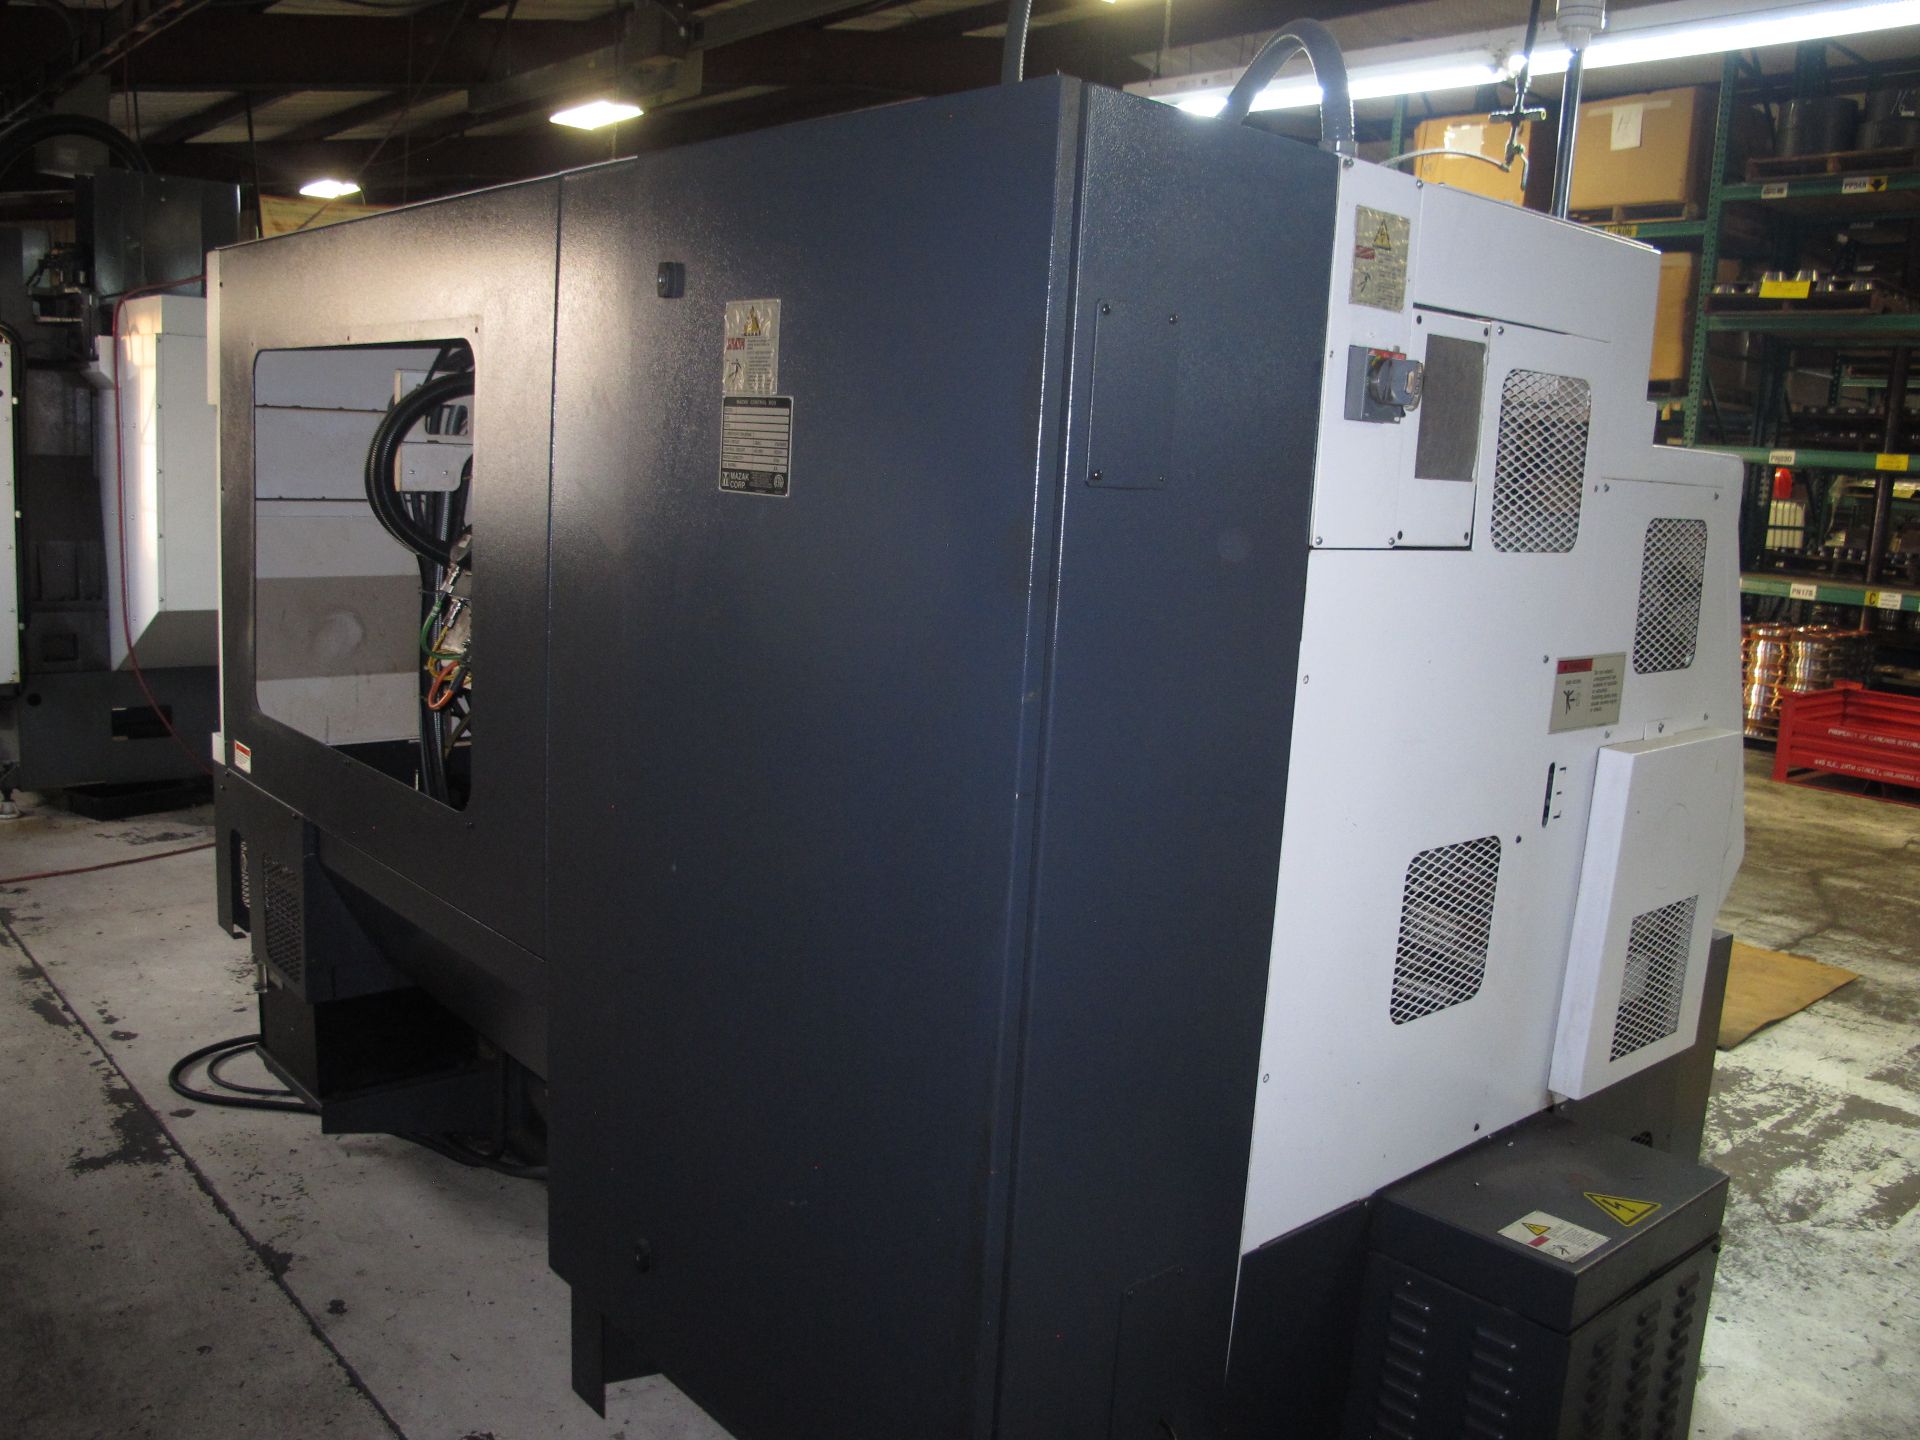 2007 MAZAK NEXUS QTN-250-II CNC TURNING CENTER, 2 AXIS, TAIL STOCK (SOLD AS-IS - NO WARRANTY) - Image 6 of 7